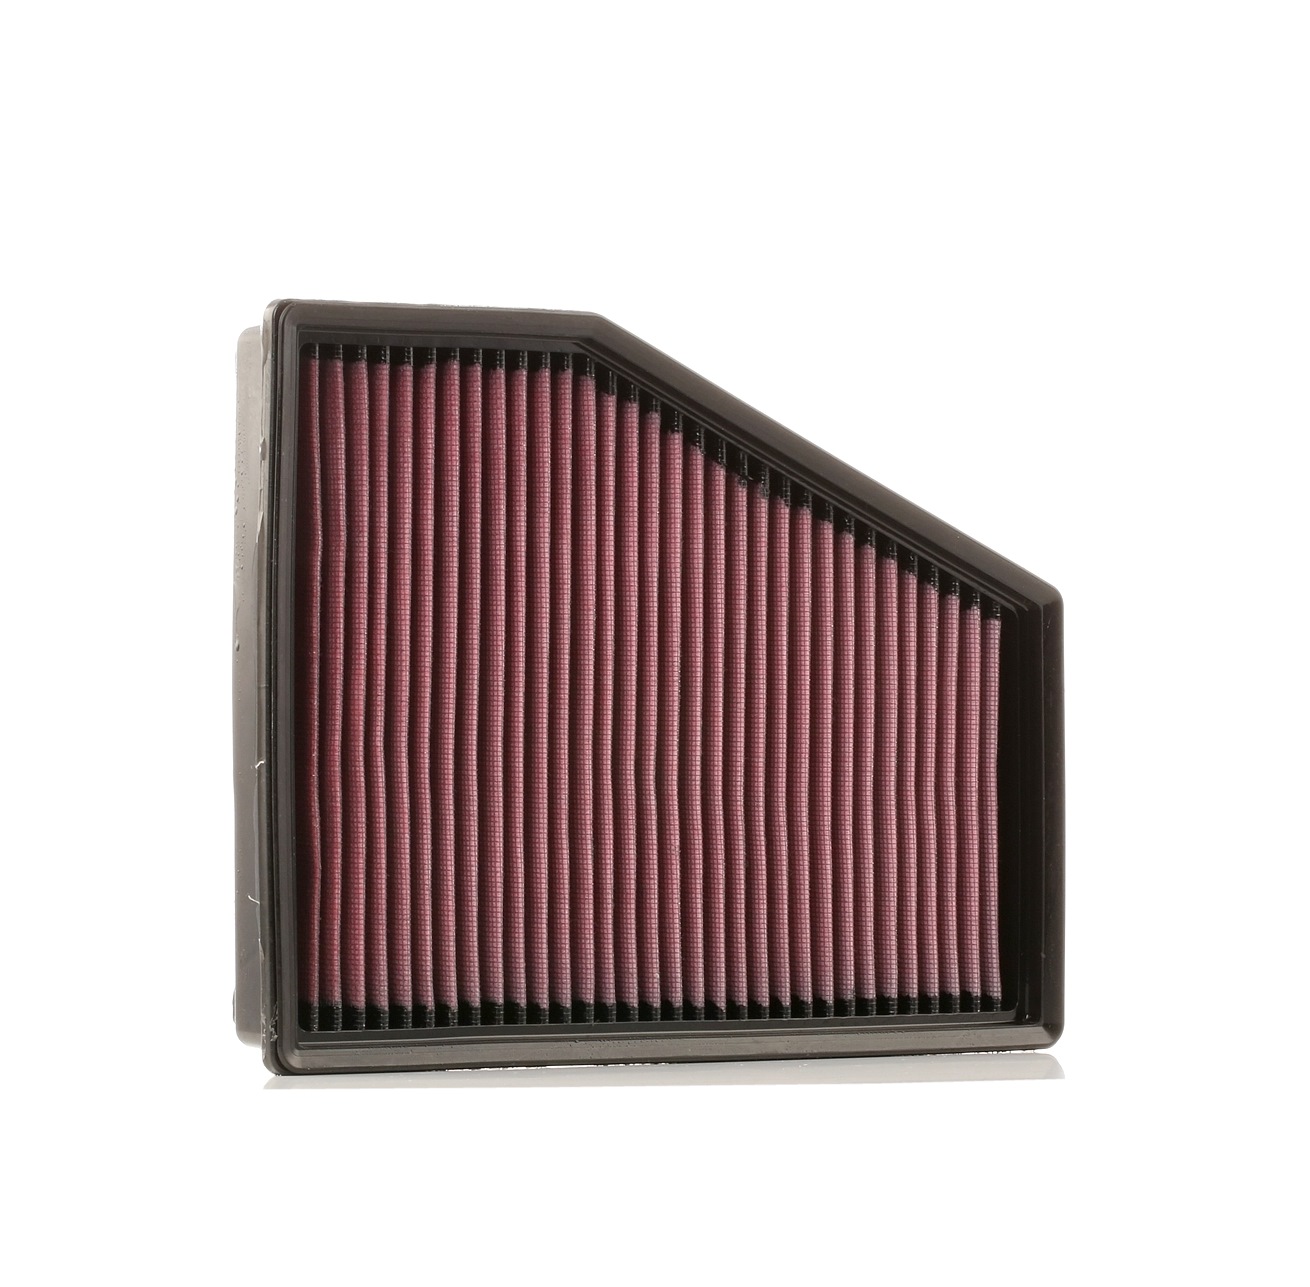 K&N Filters 43mm, 225mm, 279mm, Square, Long-life Filter Length: 279mm, Width: 225mm, Height: 43mm Engine air filter 33-3013 buy